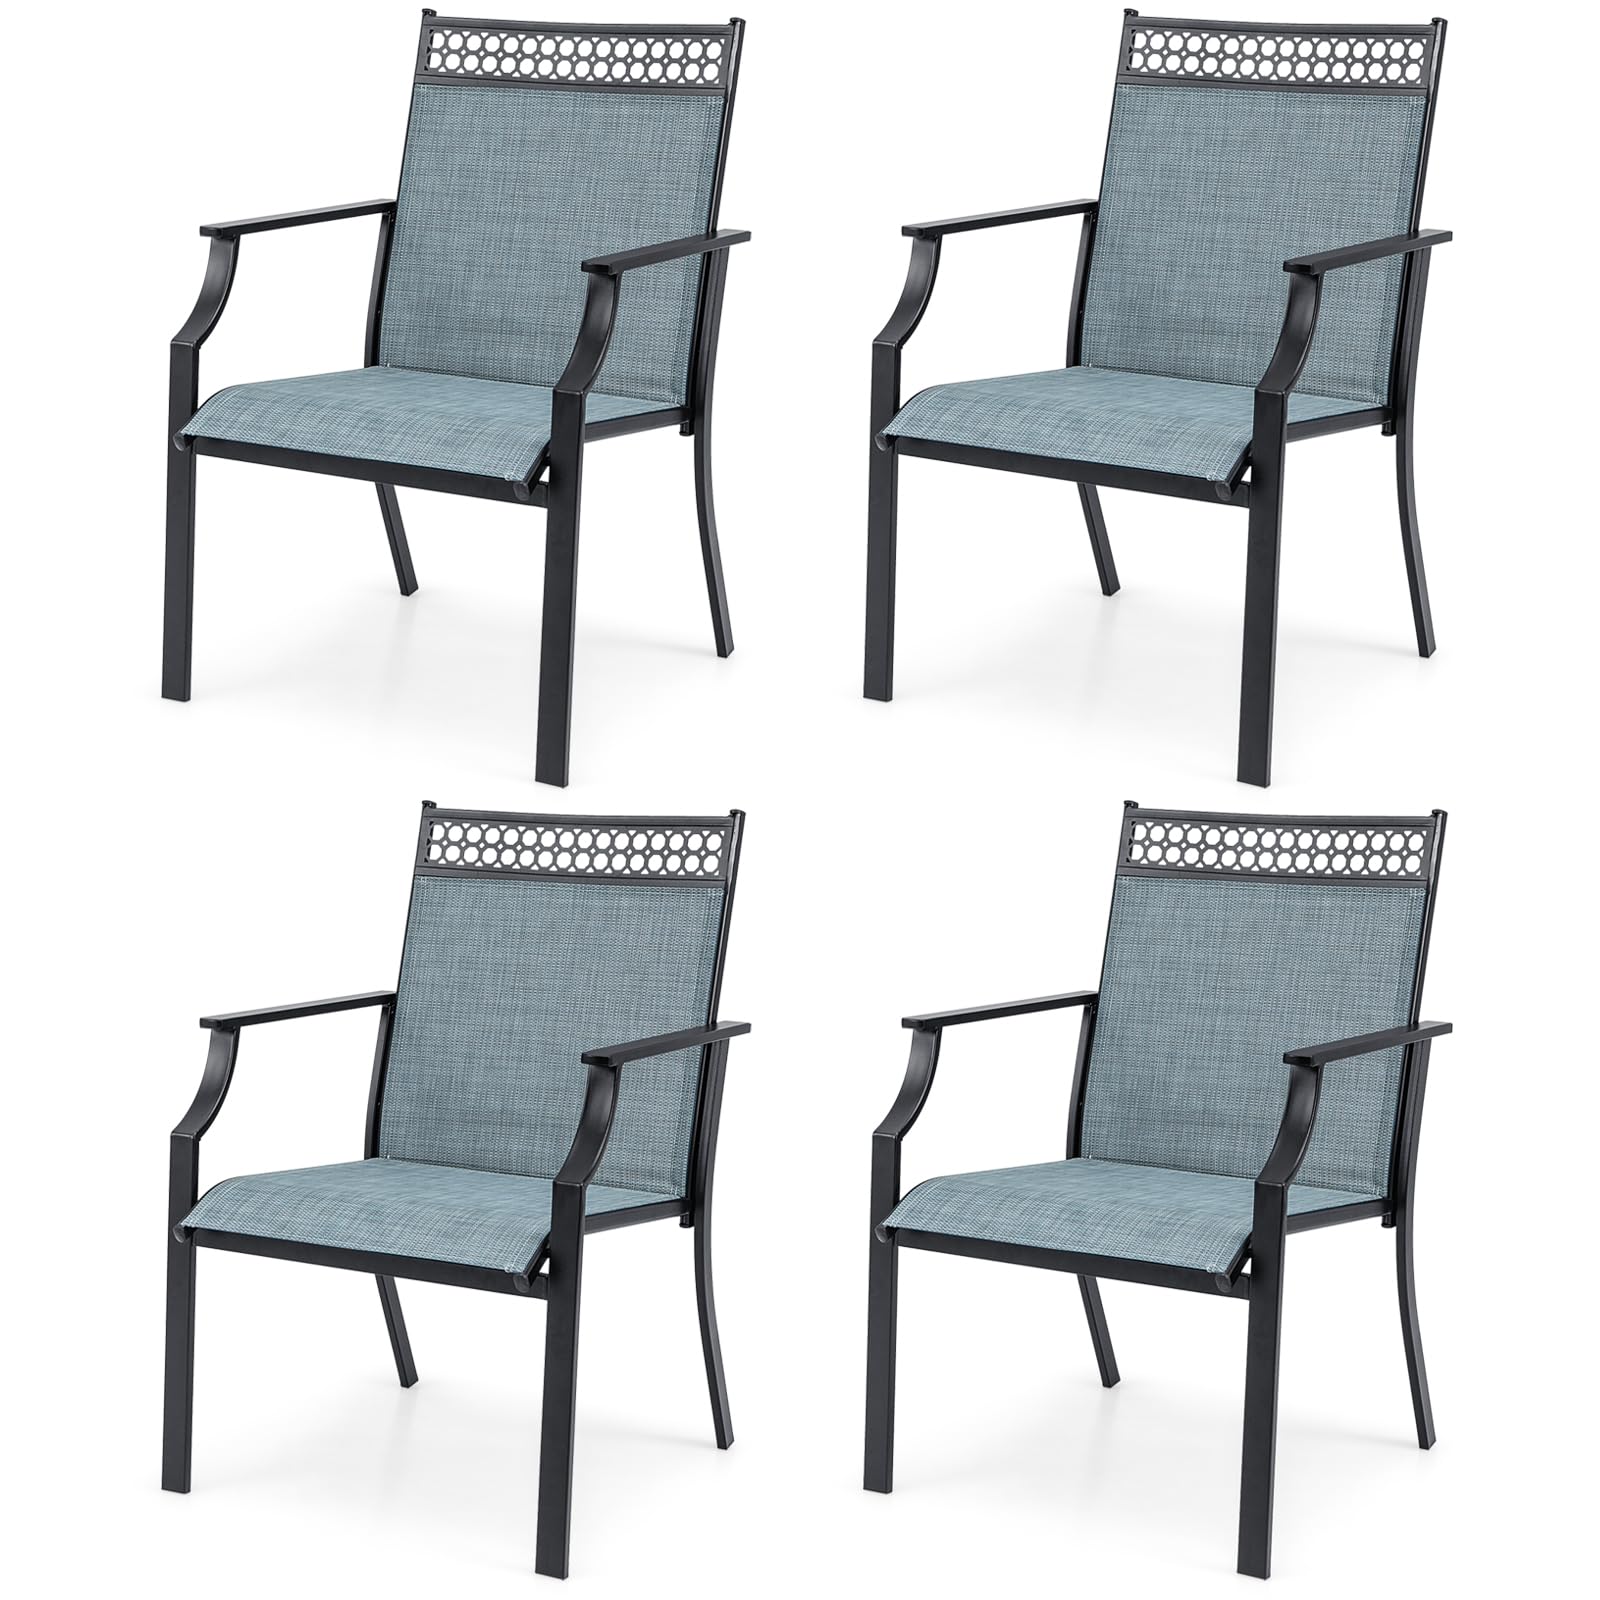 Giantex Patio Chairs Set of 2/4, Outdoor Chairs with All Weather Fabric, High Backrest, Armrests